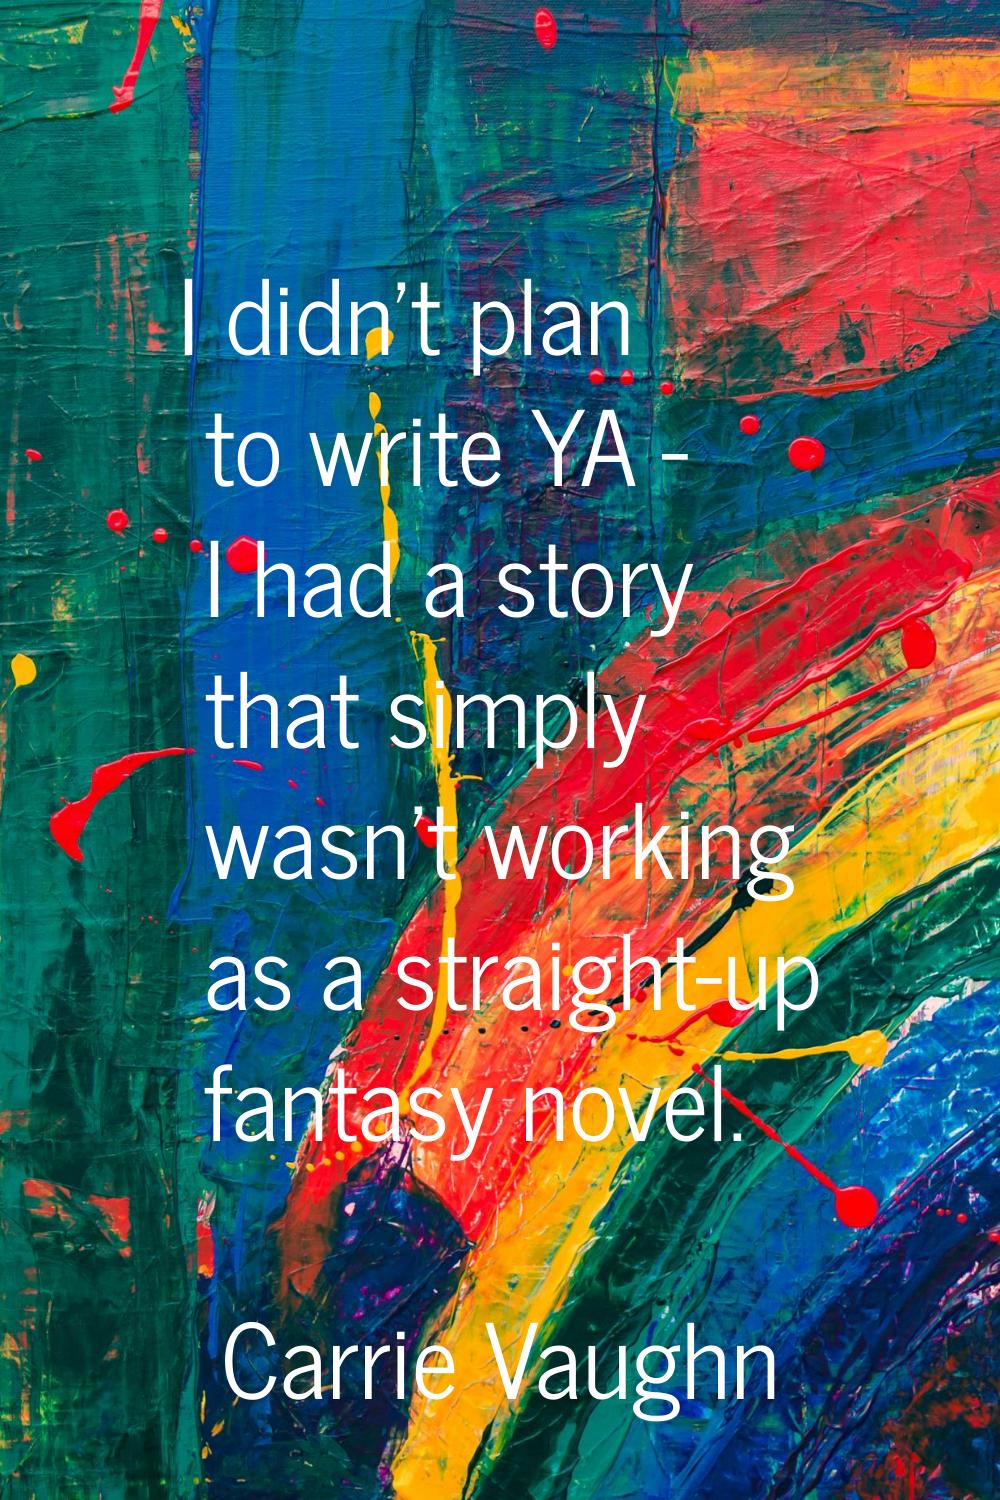 I didn't plan to write YA - I had a story that simply wasn't working as a straight-up fantasy novel